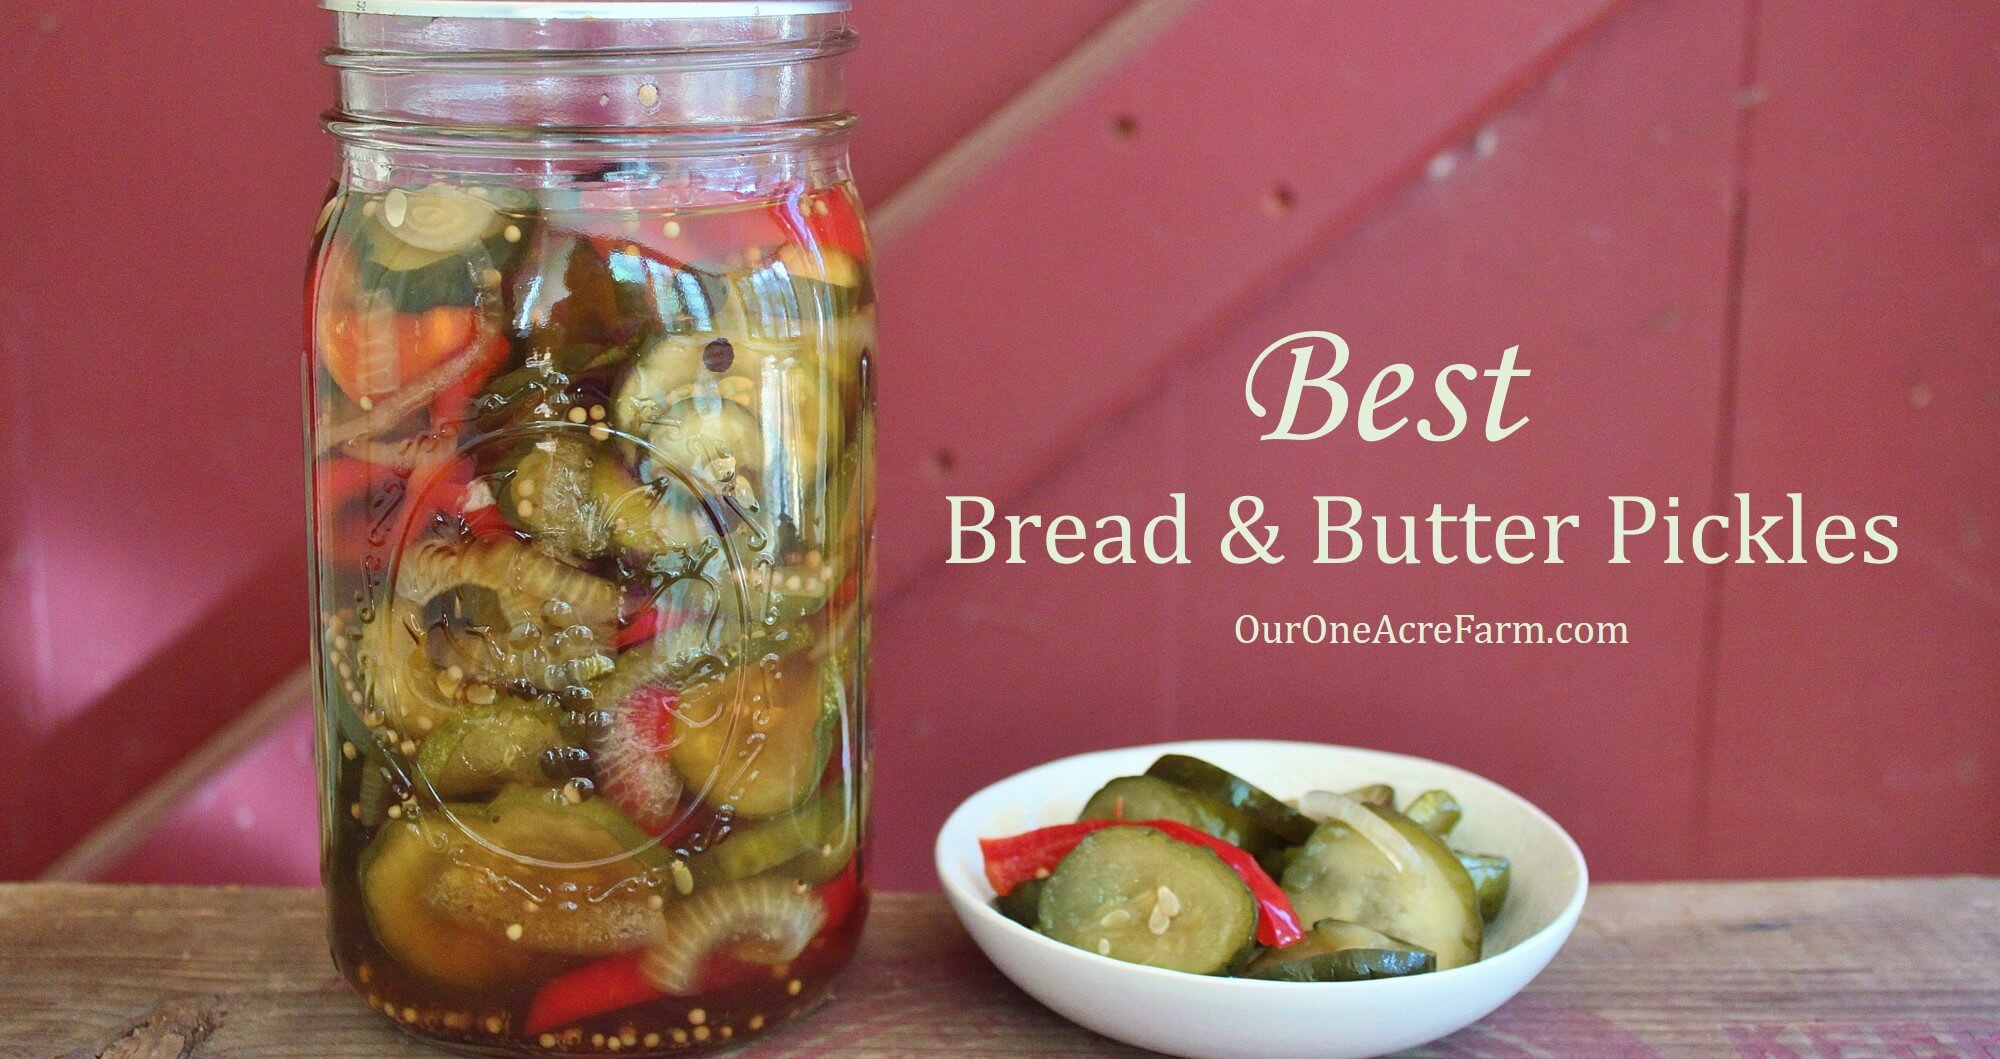 What makes these bread and butter pickles so special? Mostly it's the combination of spices, but using all brown sugar and apple cider vinegar also add to the deliciousness. My favorite way of preserving cucumbers.